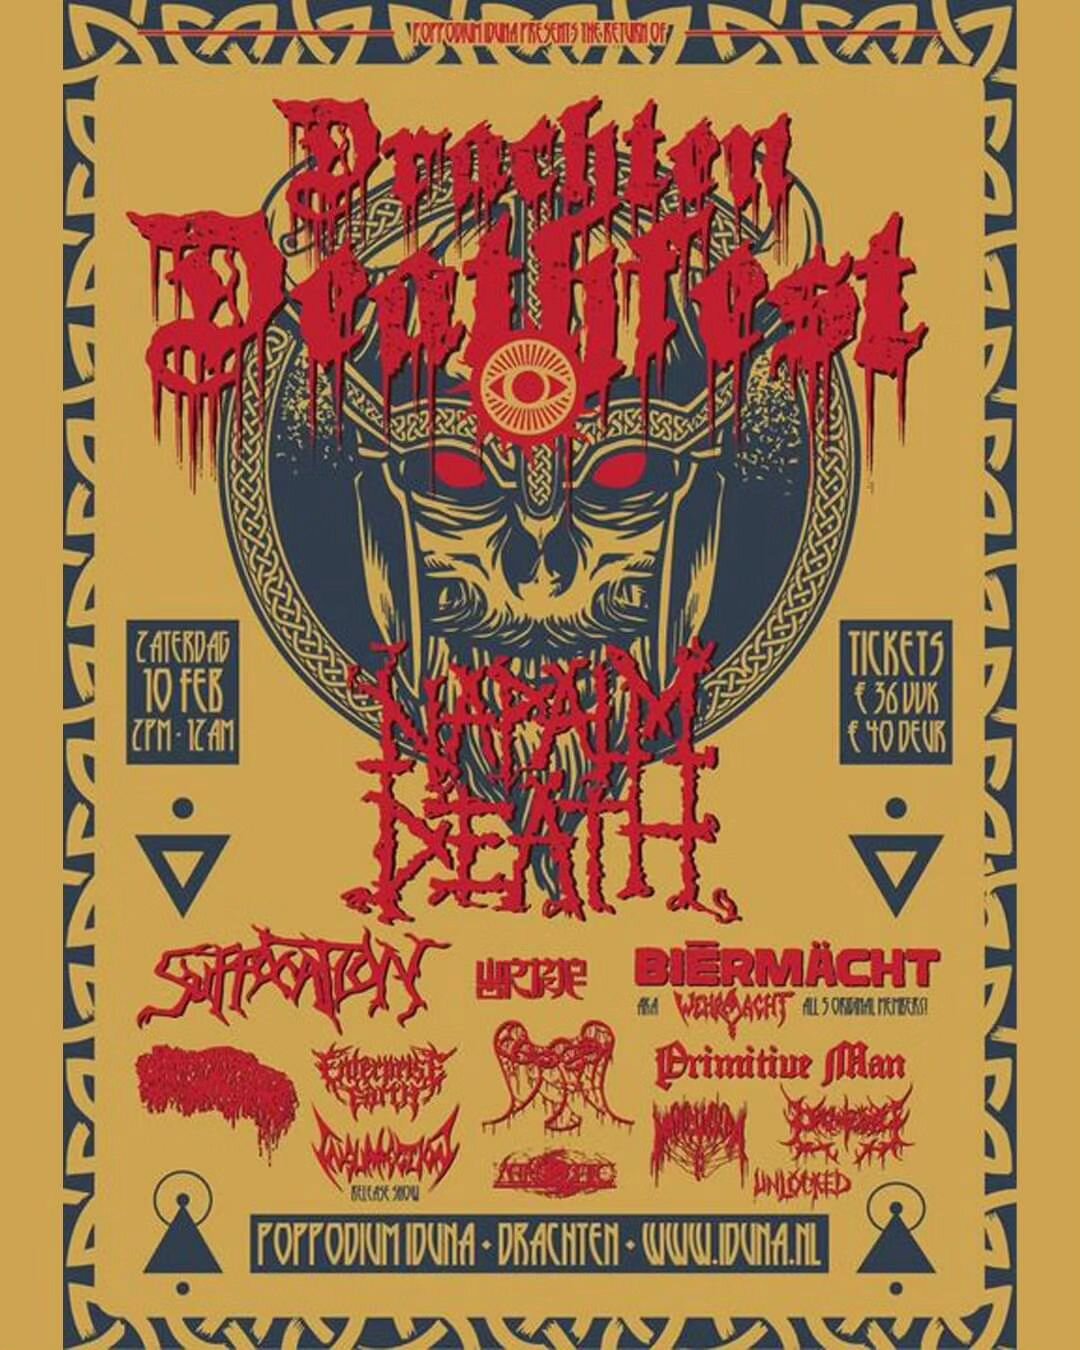 Drachten Deathfest today! Our tour package is linking up with the likes of @theofficialnapalmdeath @primitivemandoom and @wormrot.official 
This one is sold out, make sure to come down early to catch our set!
@suffocationofficial 
@sanguisugabogg 
@e